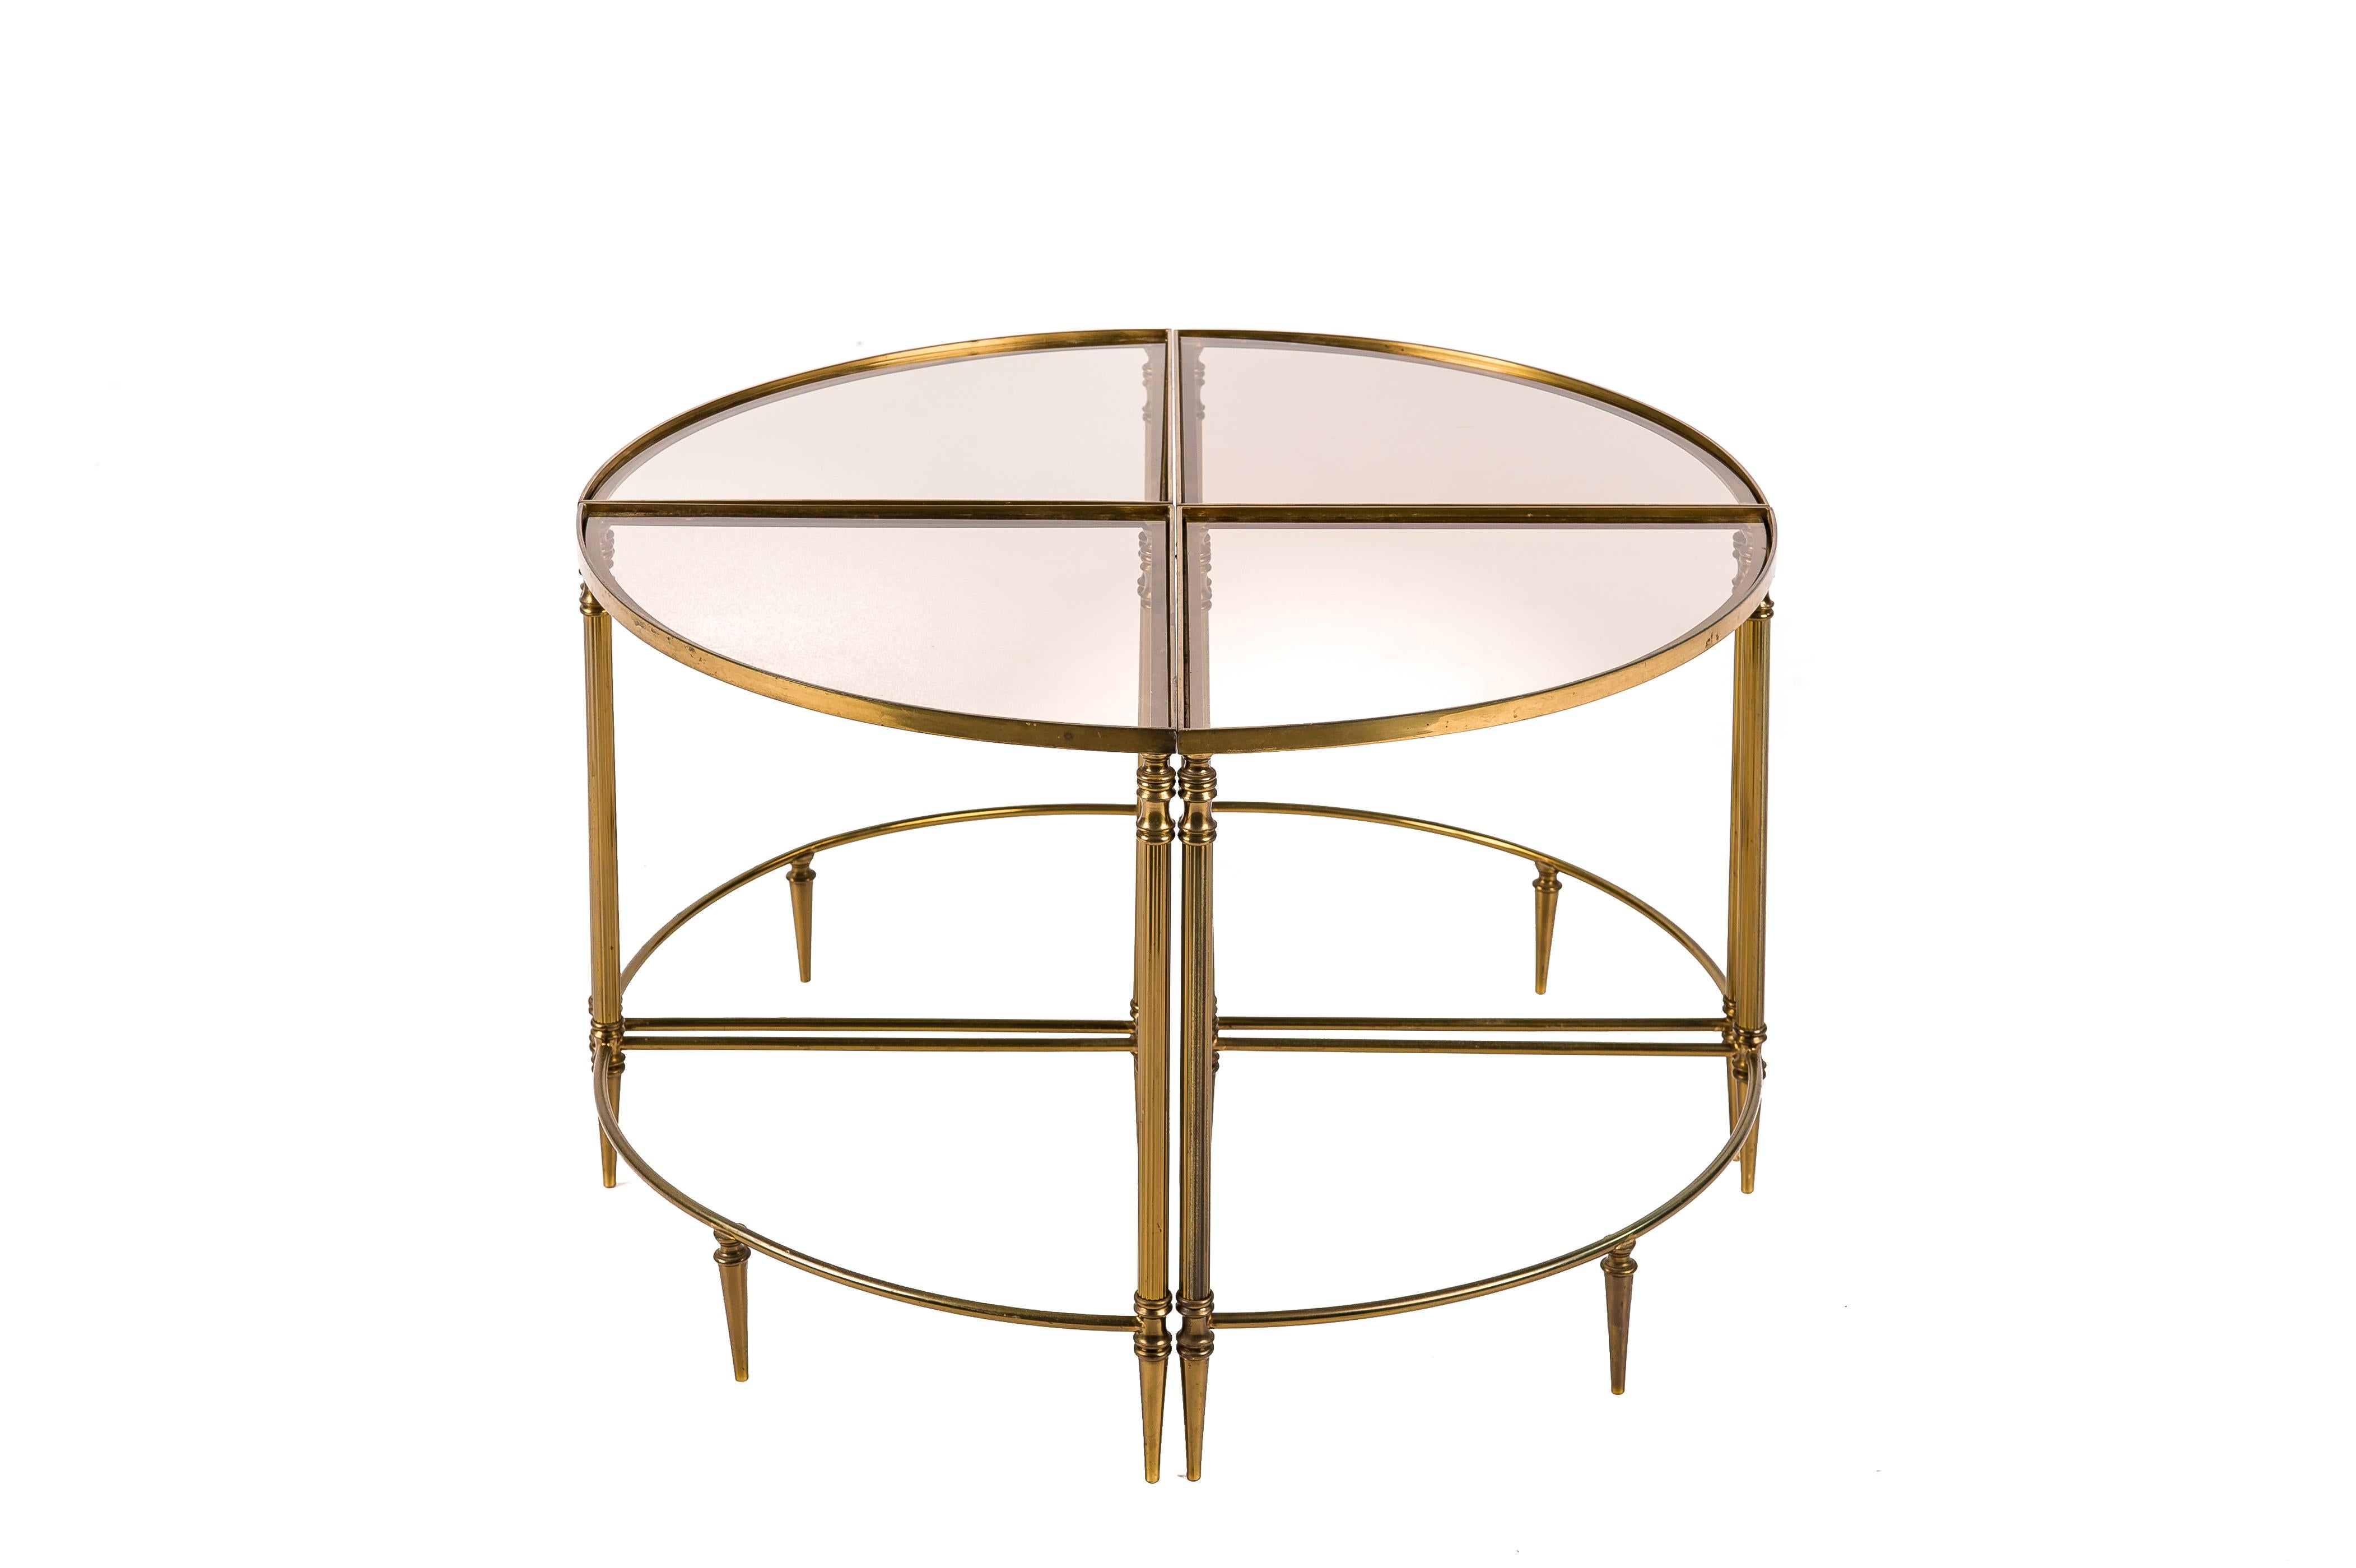 A beautiful set of four quarter-round nesting tables by Maison Baques, dating circa 1970. The 4 identical tables have neo-classical solid brass columns joined by a quarter-round apron and stretcher. The tables have a recessed smoked glass top. The